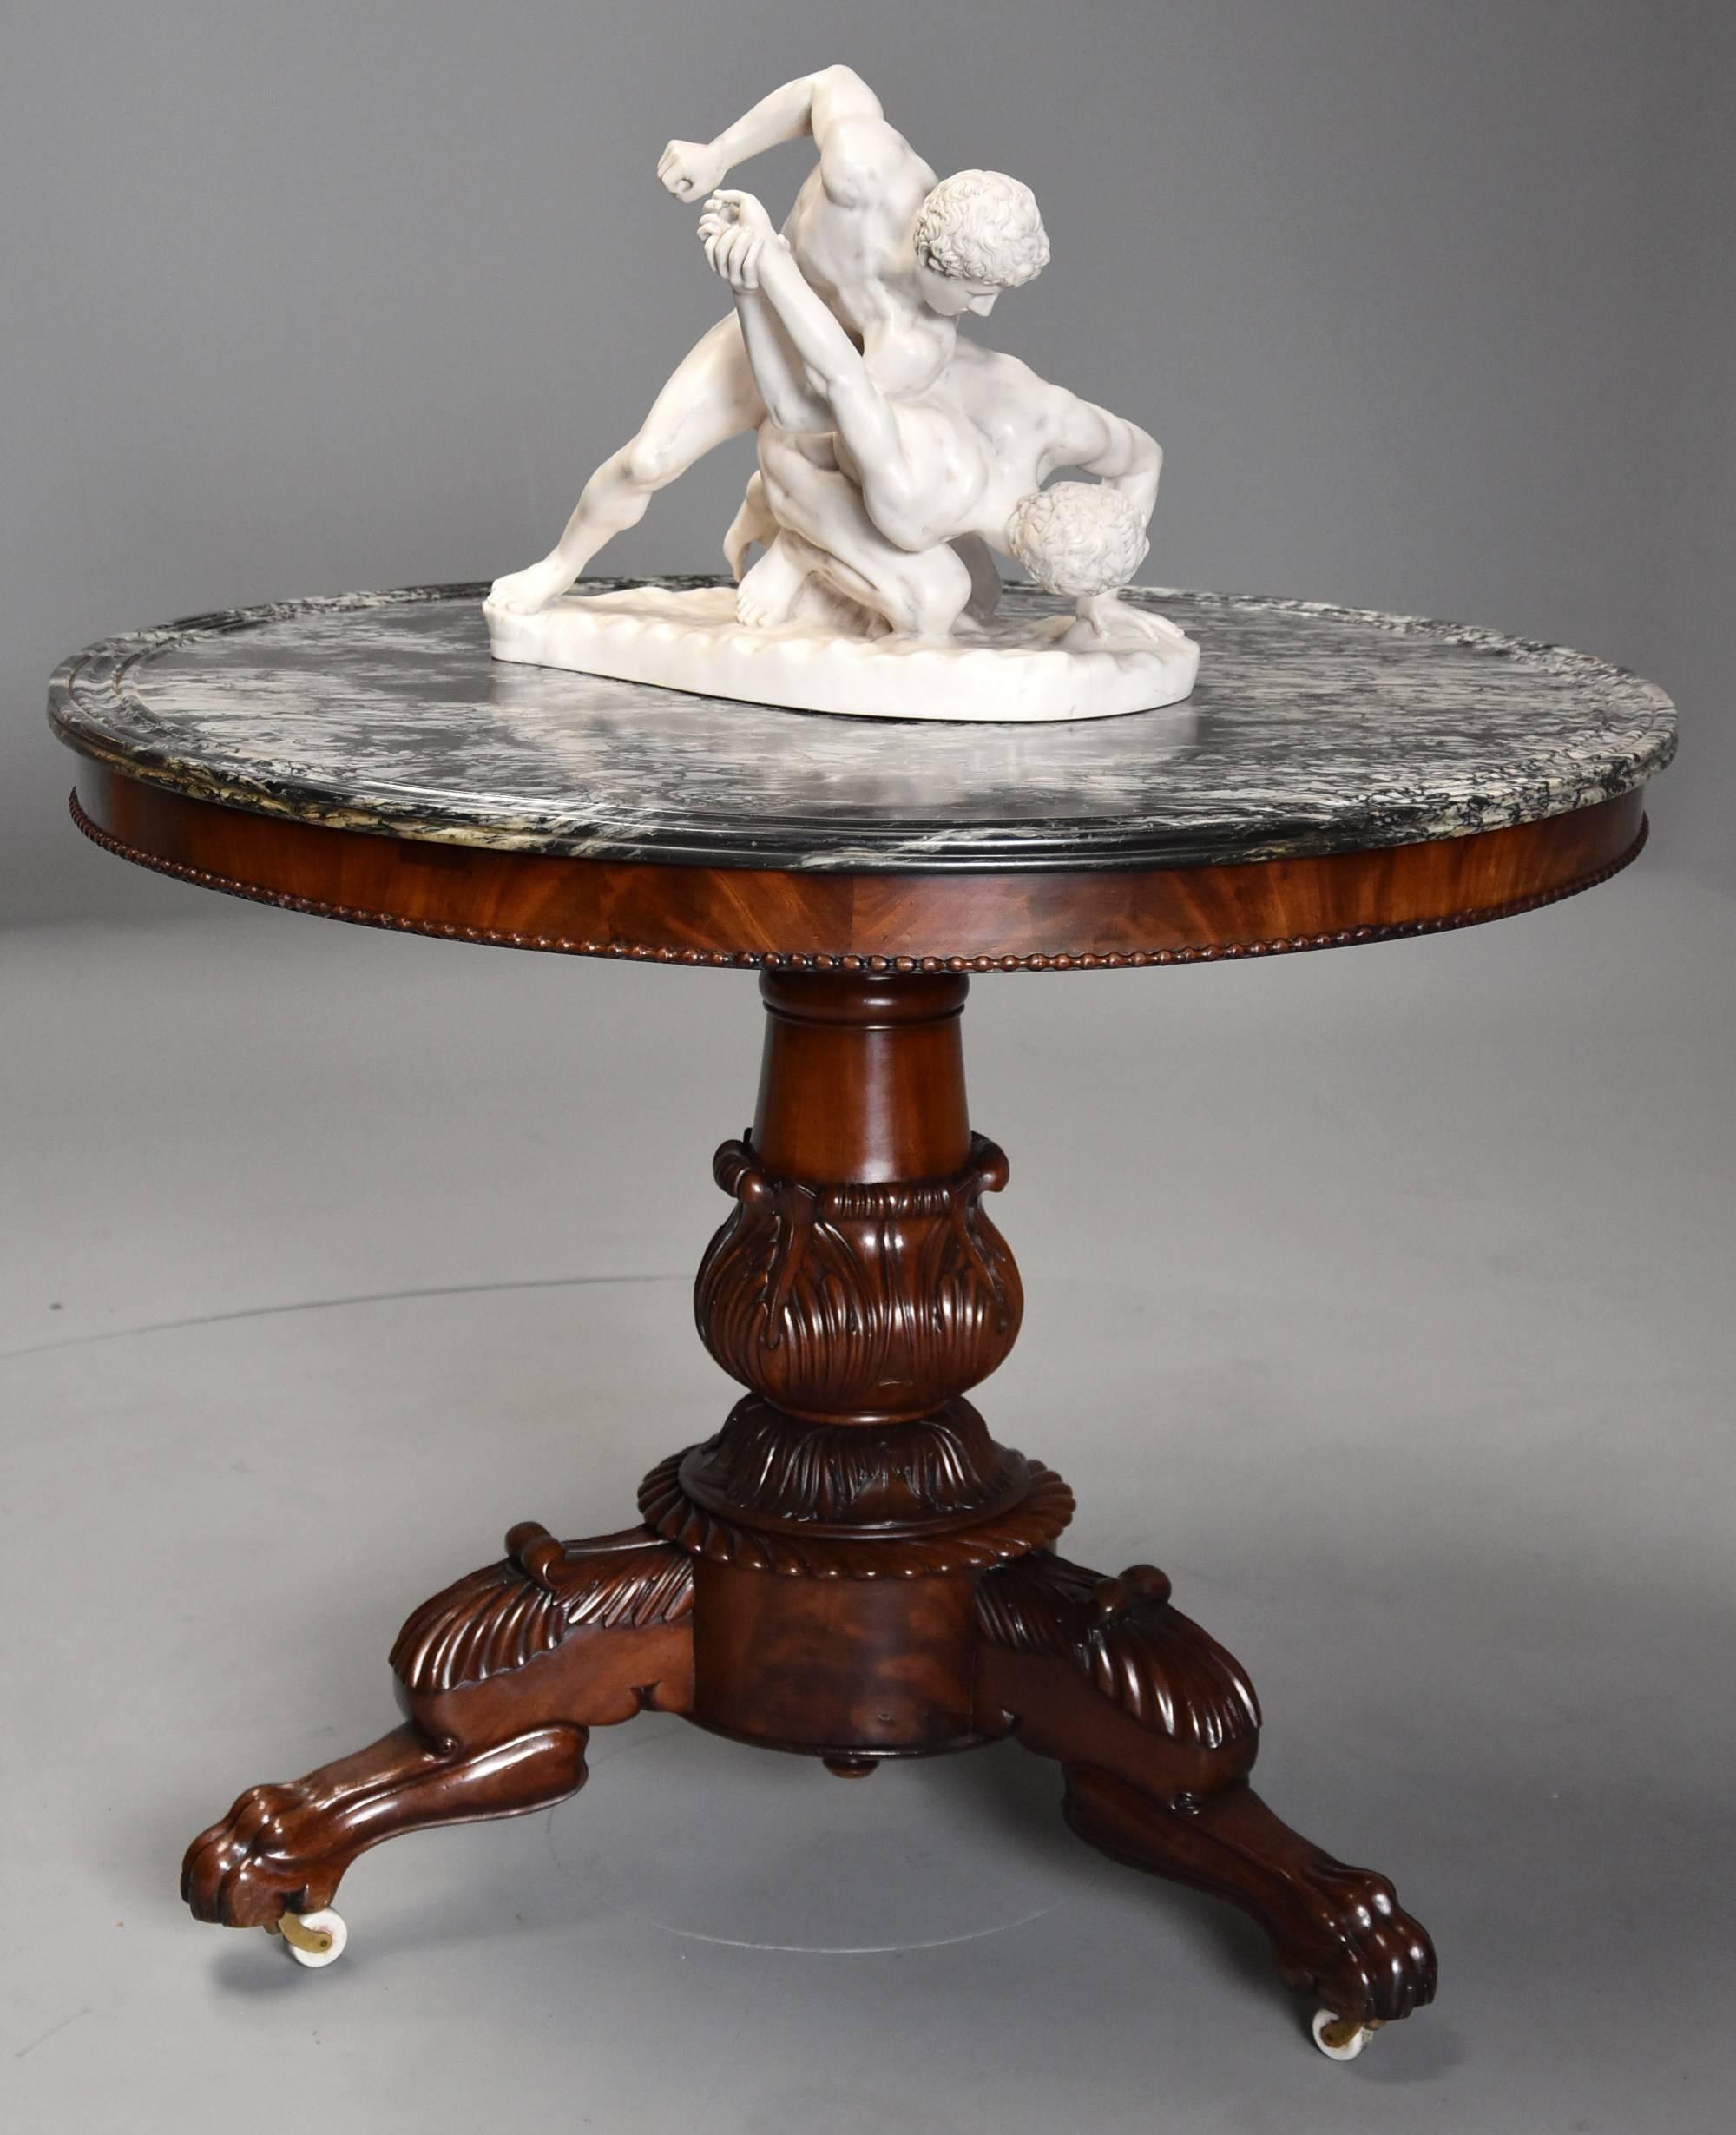 A 19th century (circa 1830) French mahogany gueridon table with original black and white veined marble-top, possibly Vert Maurin.

The table consists of the original marble-top, this being a black and white veined marble, possibly Vert Maurin,